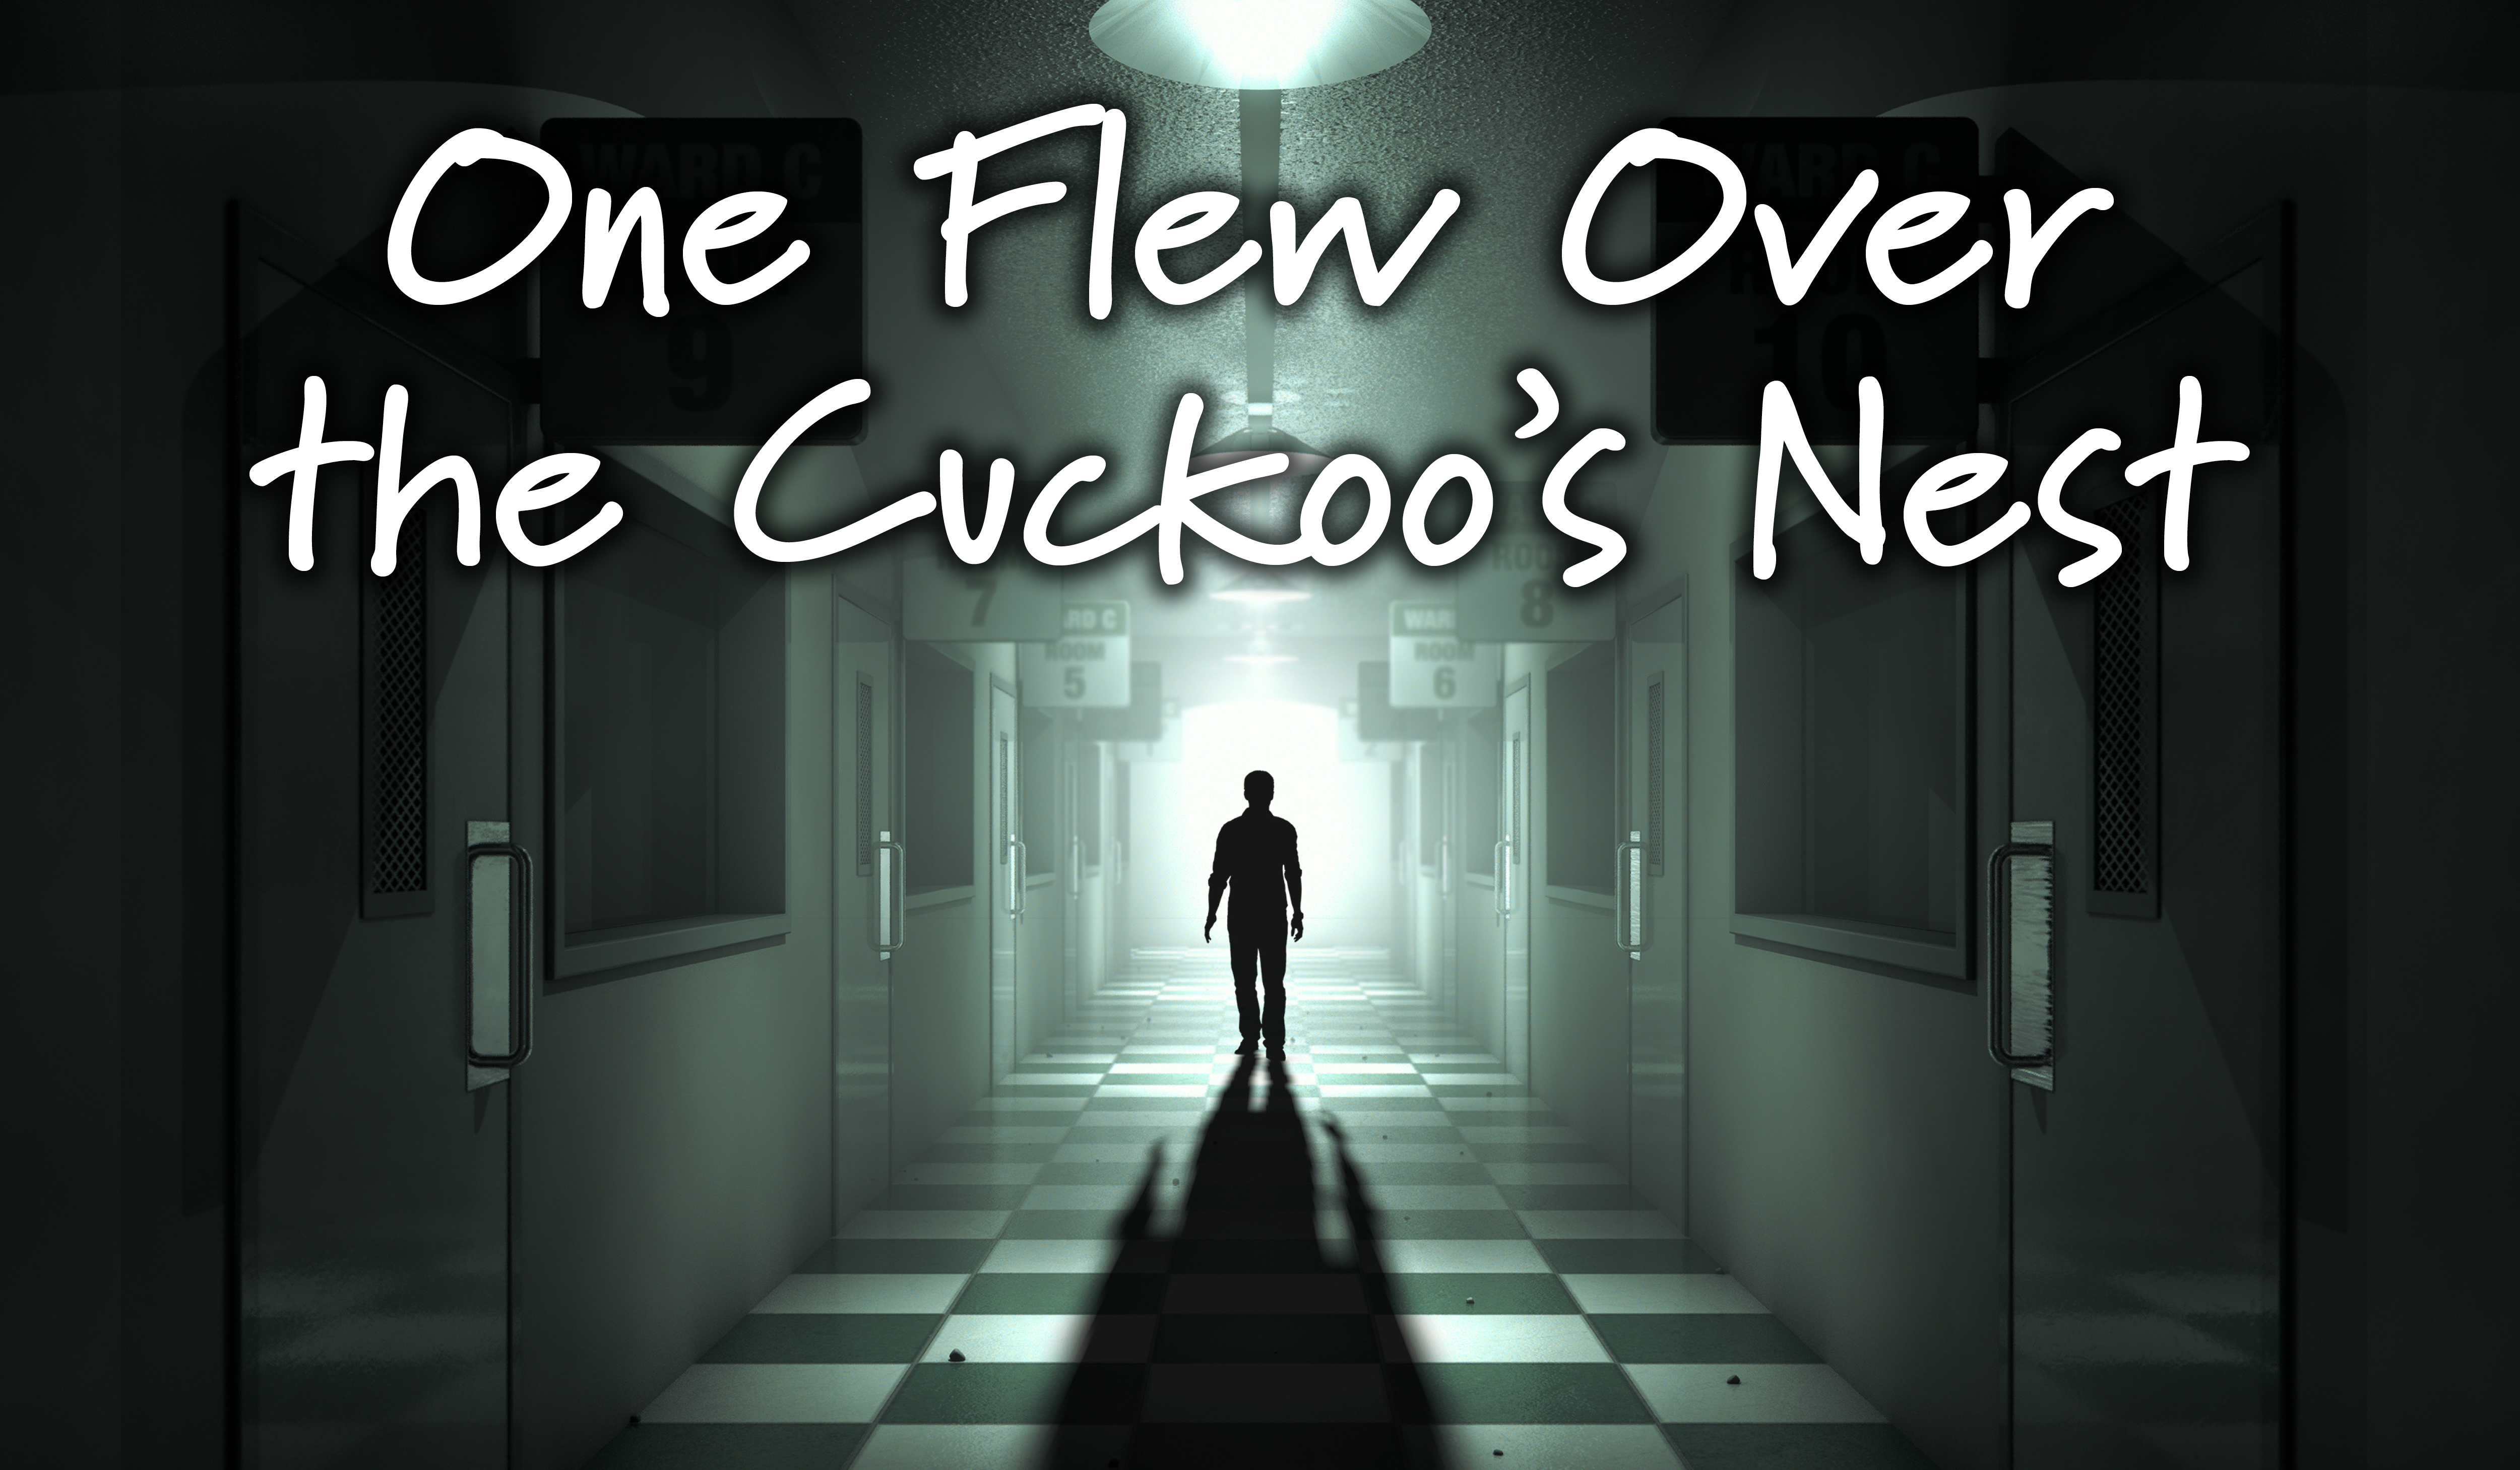 One flew over the Cuckoo's Nest web image